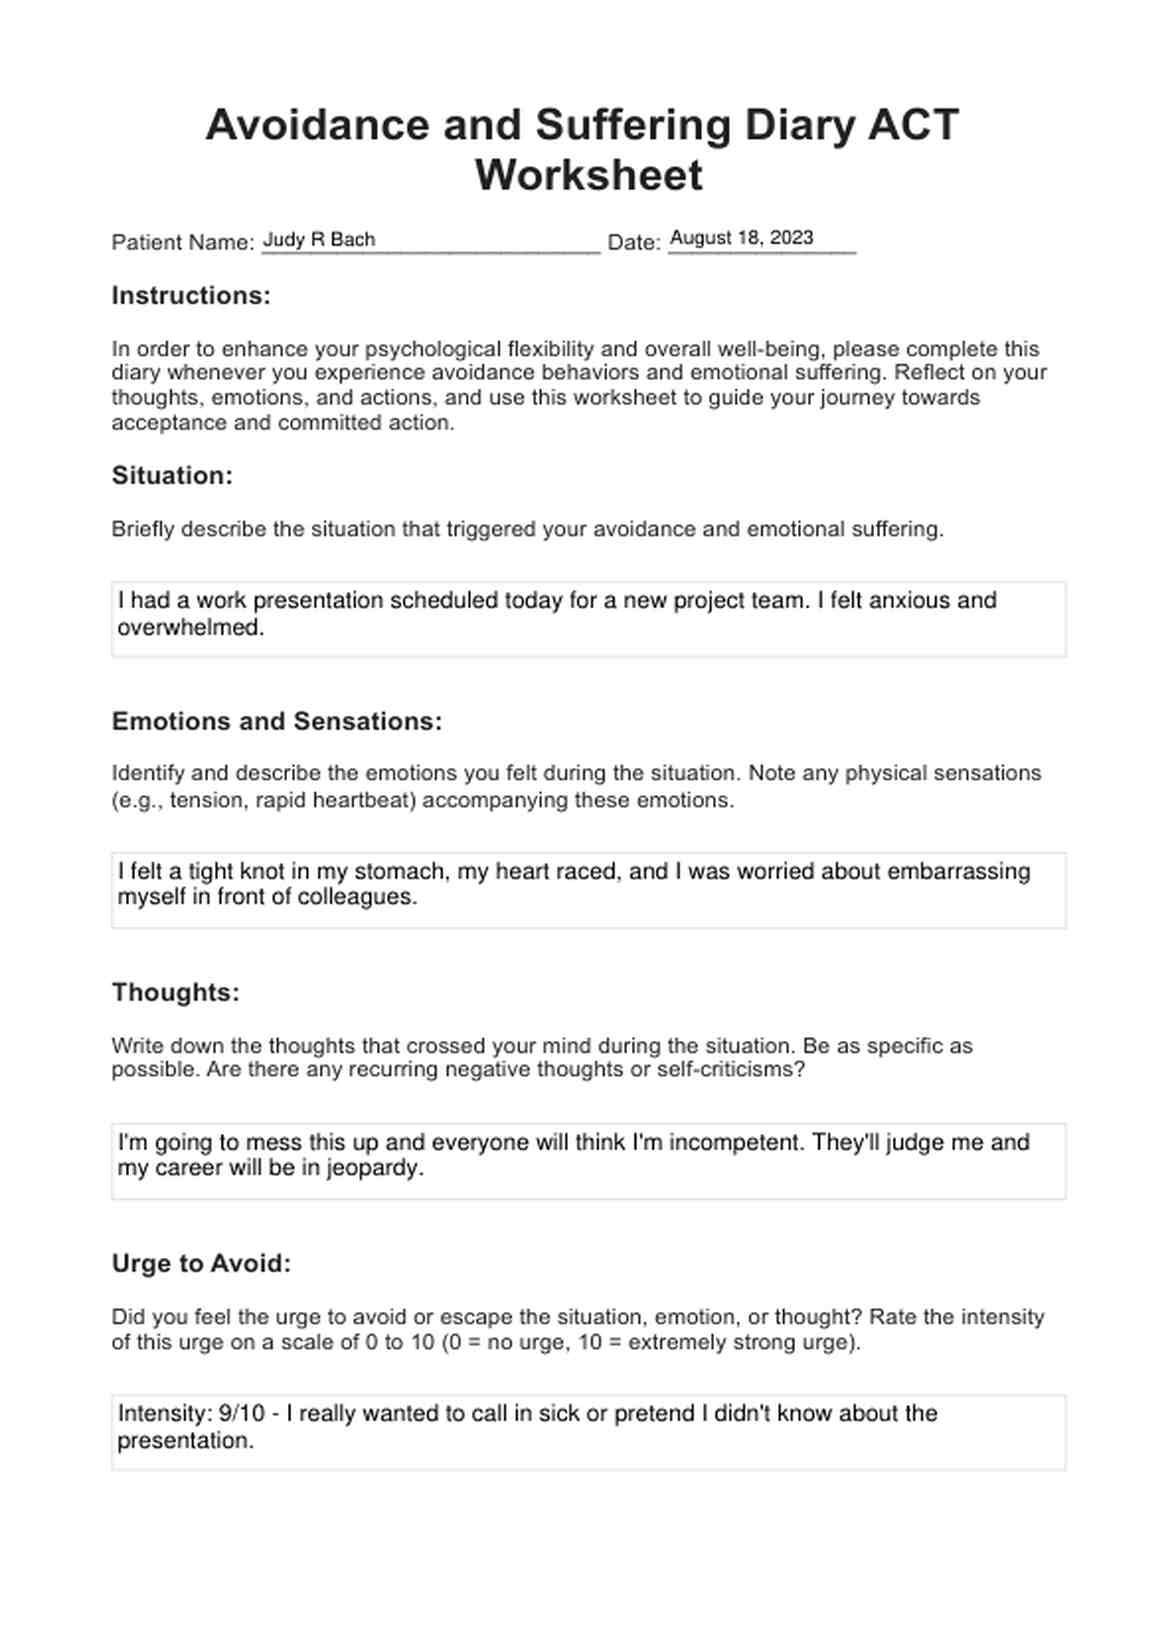 Avoidance and Suffering Diary ACT Worksheet PDF Example